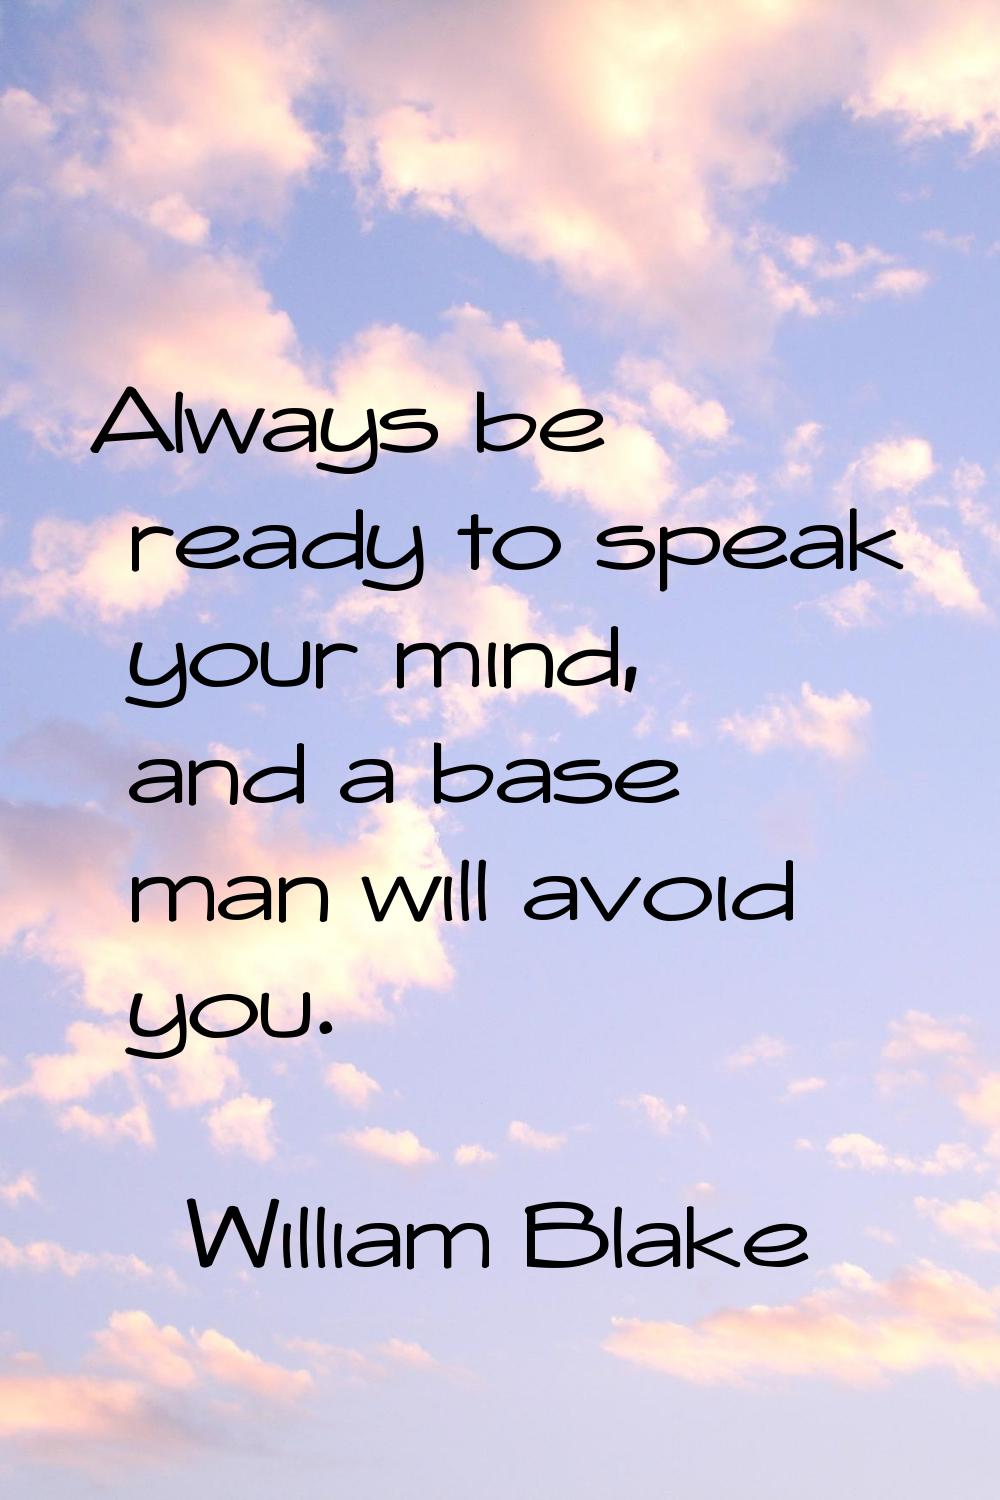 Always be ready to speak your mind, and a base man will avoid you.